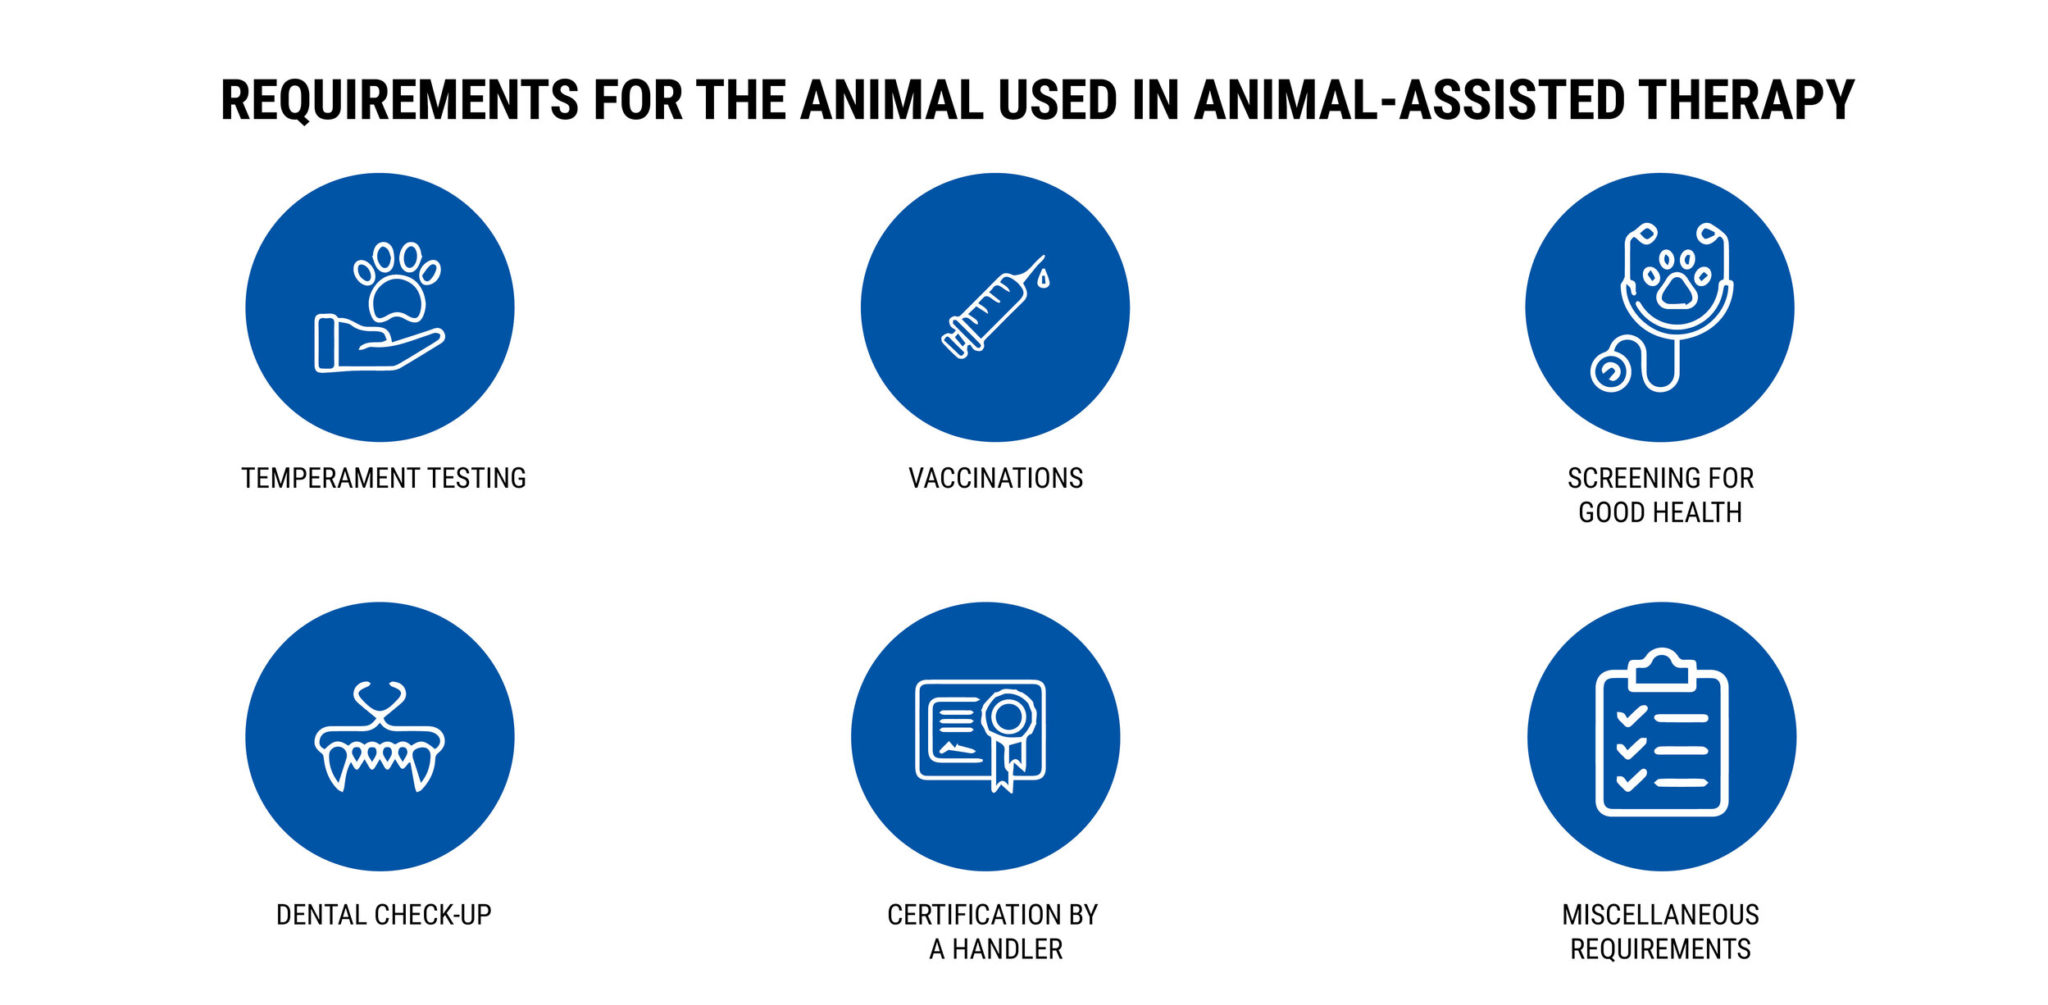 REQUIREMENTS FOR THE ANIMAL-ASSISTED THERAPY